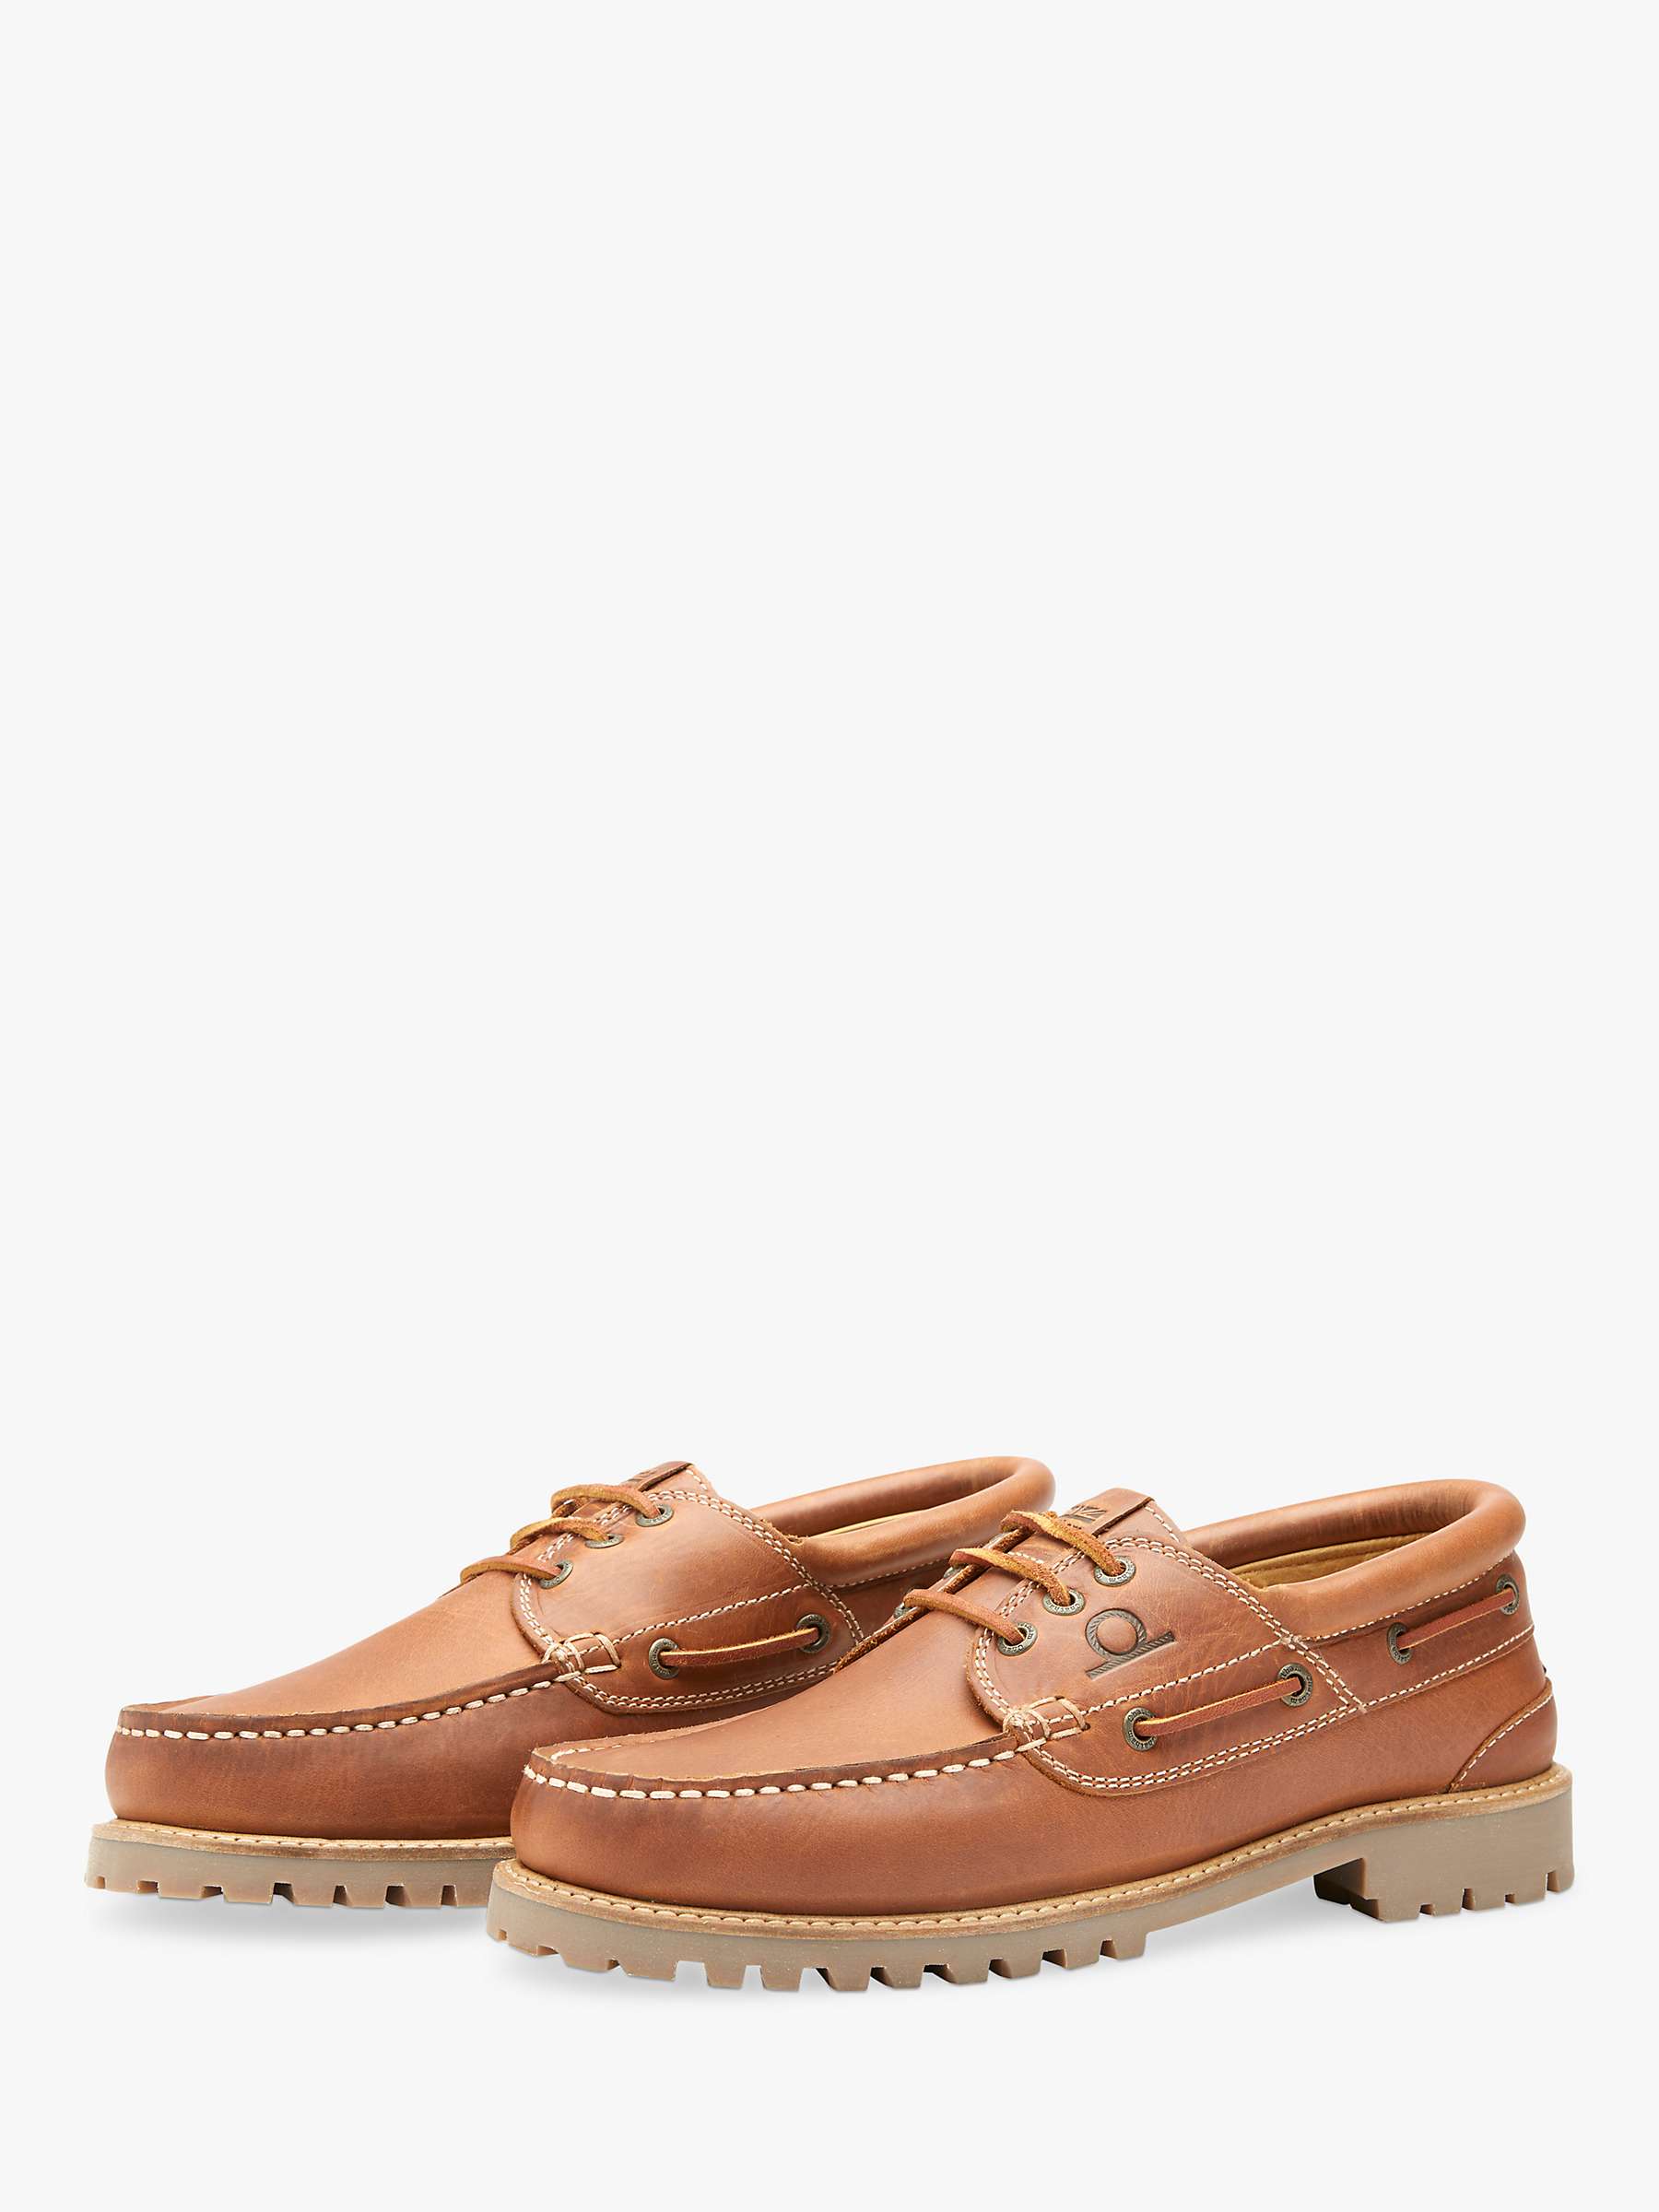 Buy Chatham Sperrin Leather Boat Shoes, Tan Online at johnlewis.com